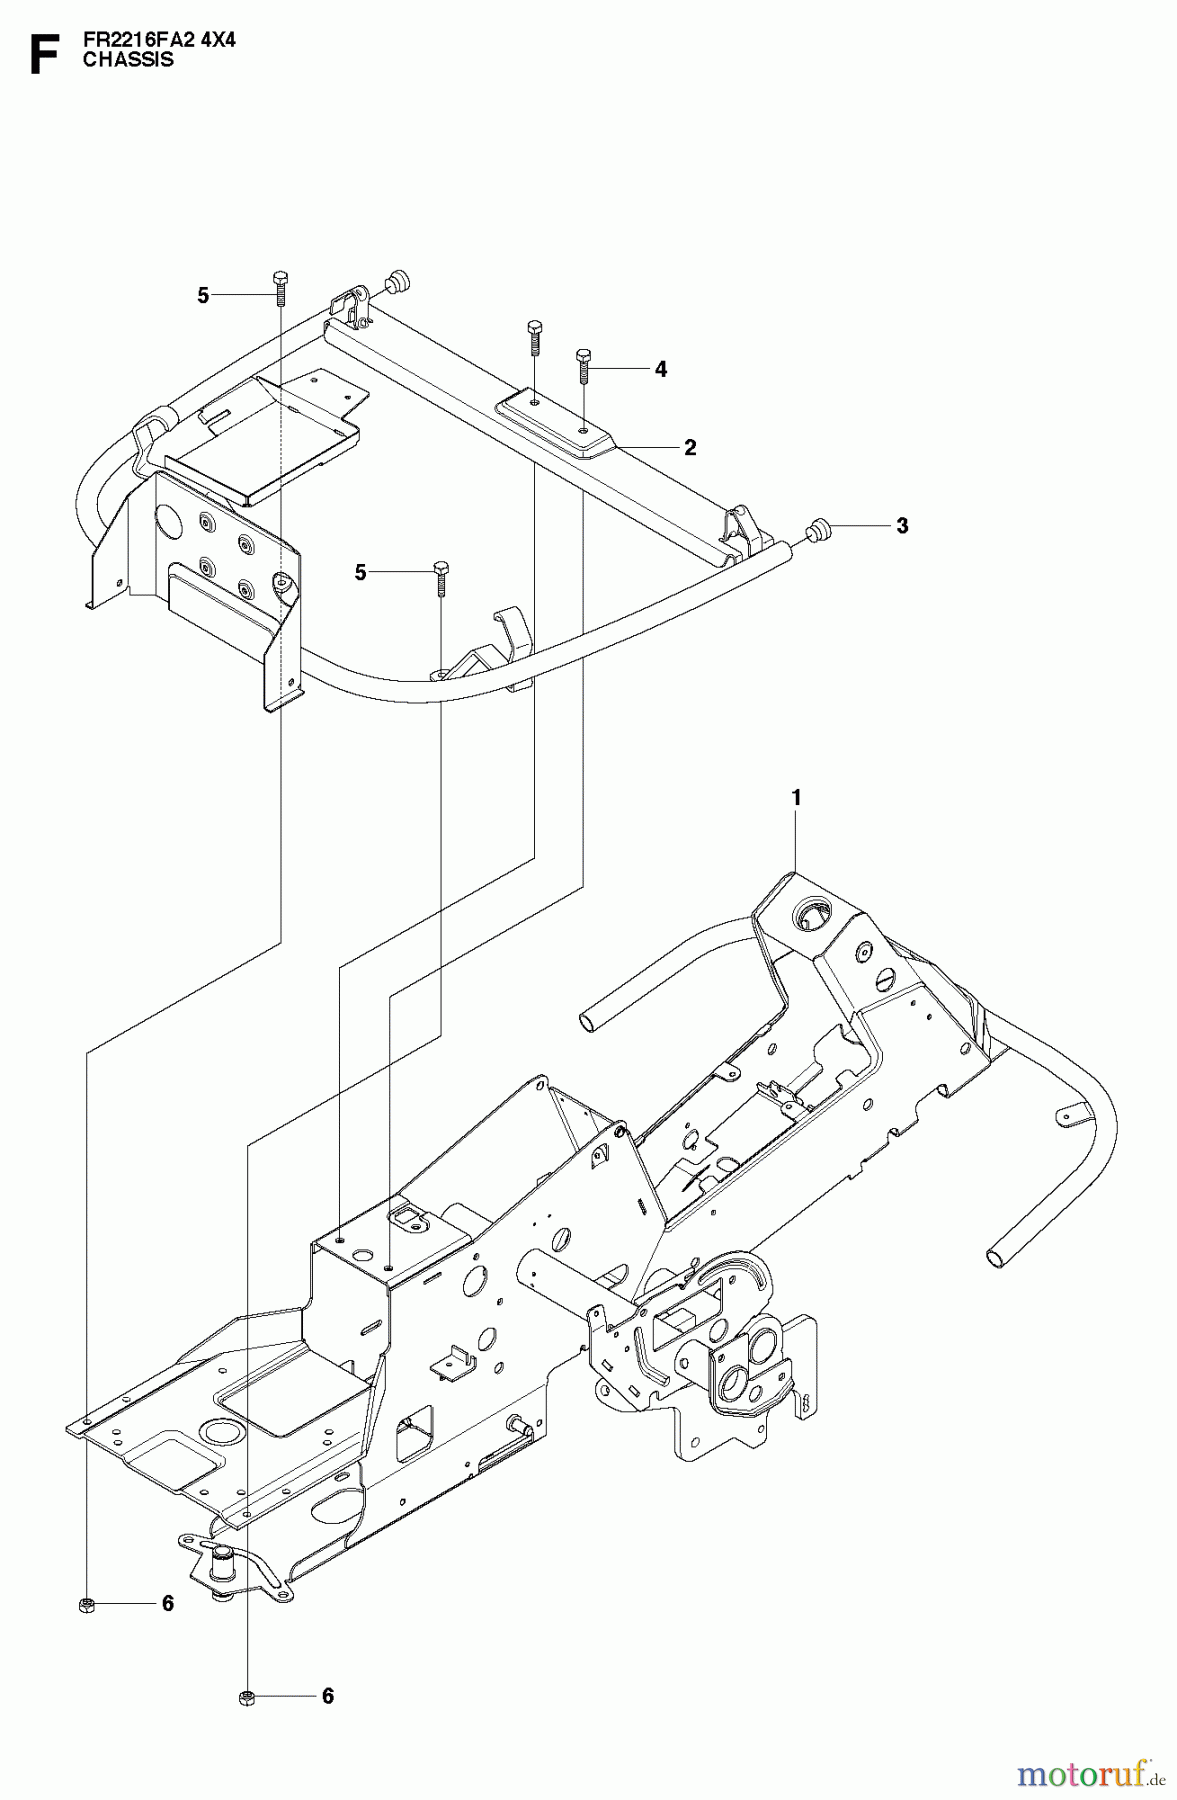  Jonsered Reitermäher FR2216 FA2 4x4 (966415201) - Jonsered Rear-Engine Riding Mower (2010-07) CHASSIS ENCLOSURES